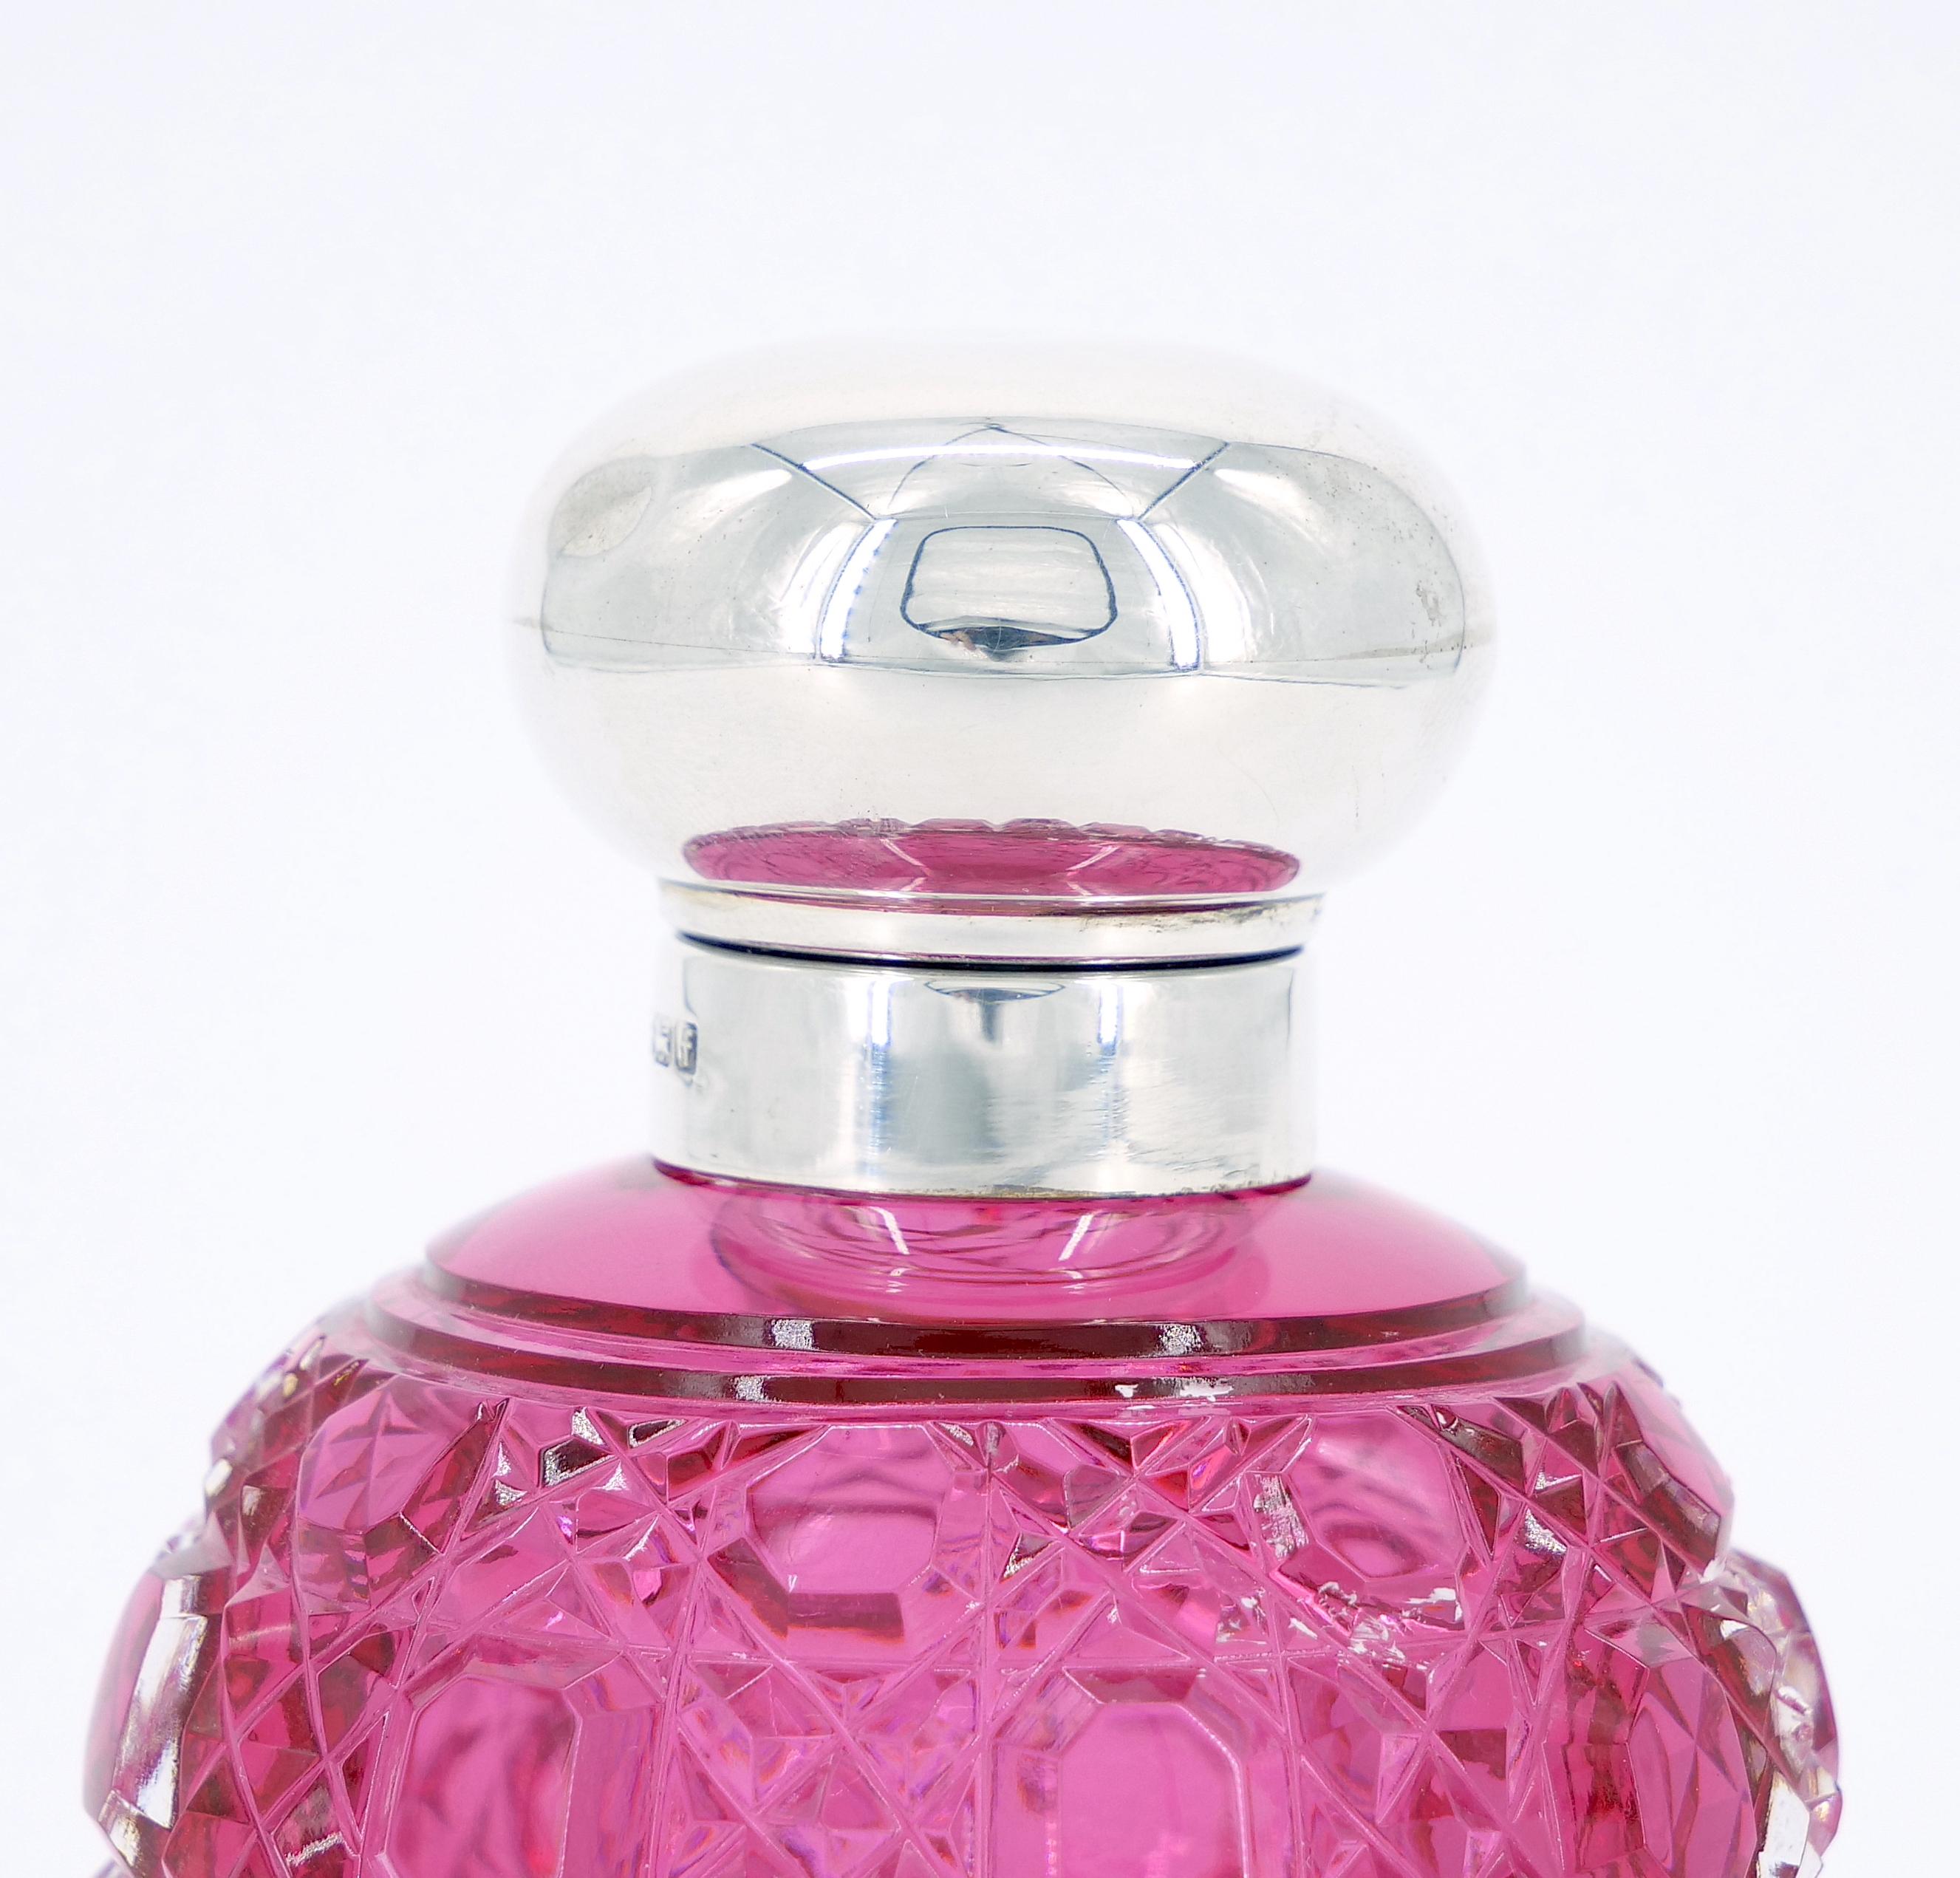 Transport yourself to the elegance of the 19th Century with this exquisite English Sterling Silver Covered Top and Cranberry brilliant Cut Glass Perfume Bottle. The perfume bottle showcases a hobnail sterling silver top complemented by an engraved